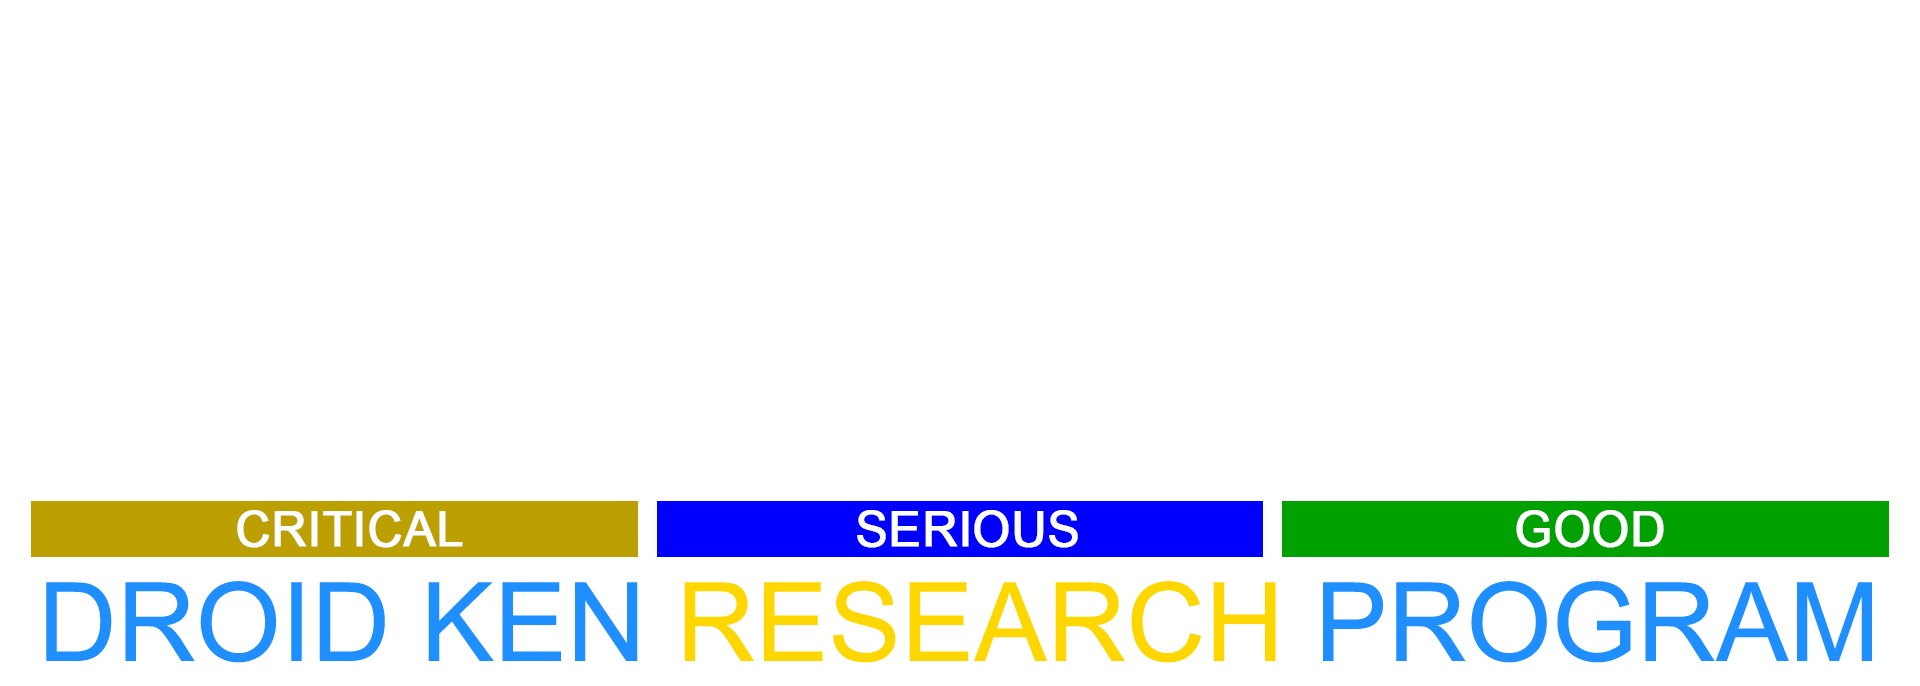 National Academies of Sciences Engineering and Medicine DROID KEN RESEARCH PROGRAM